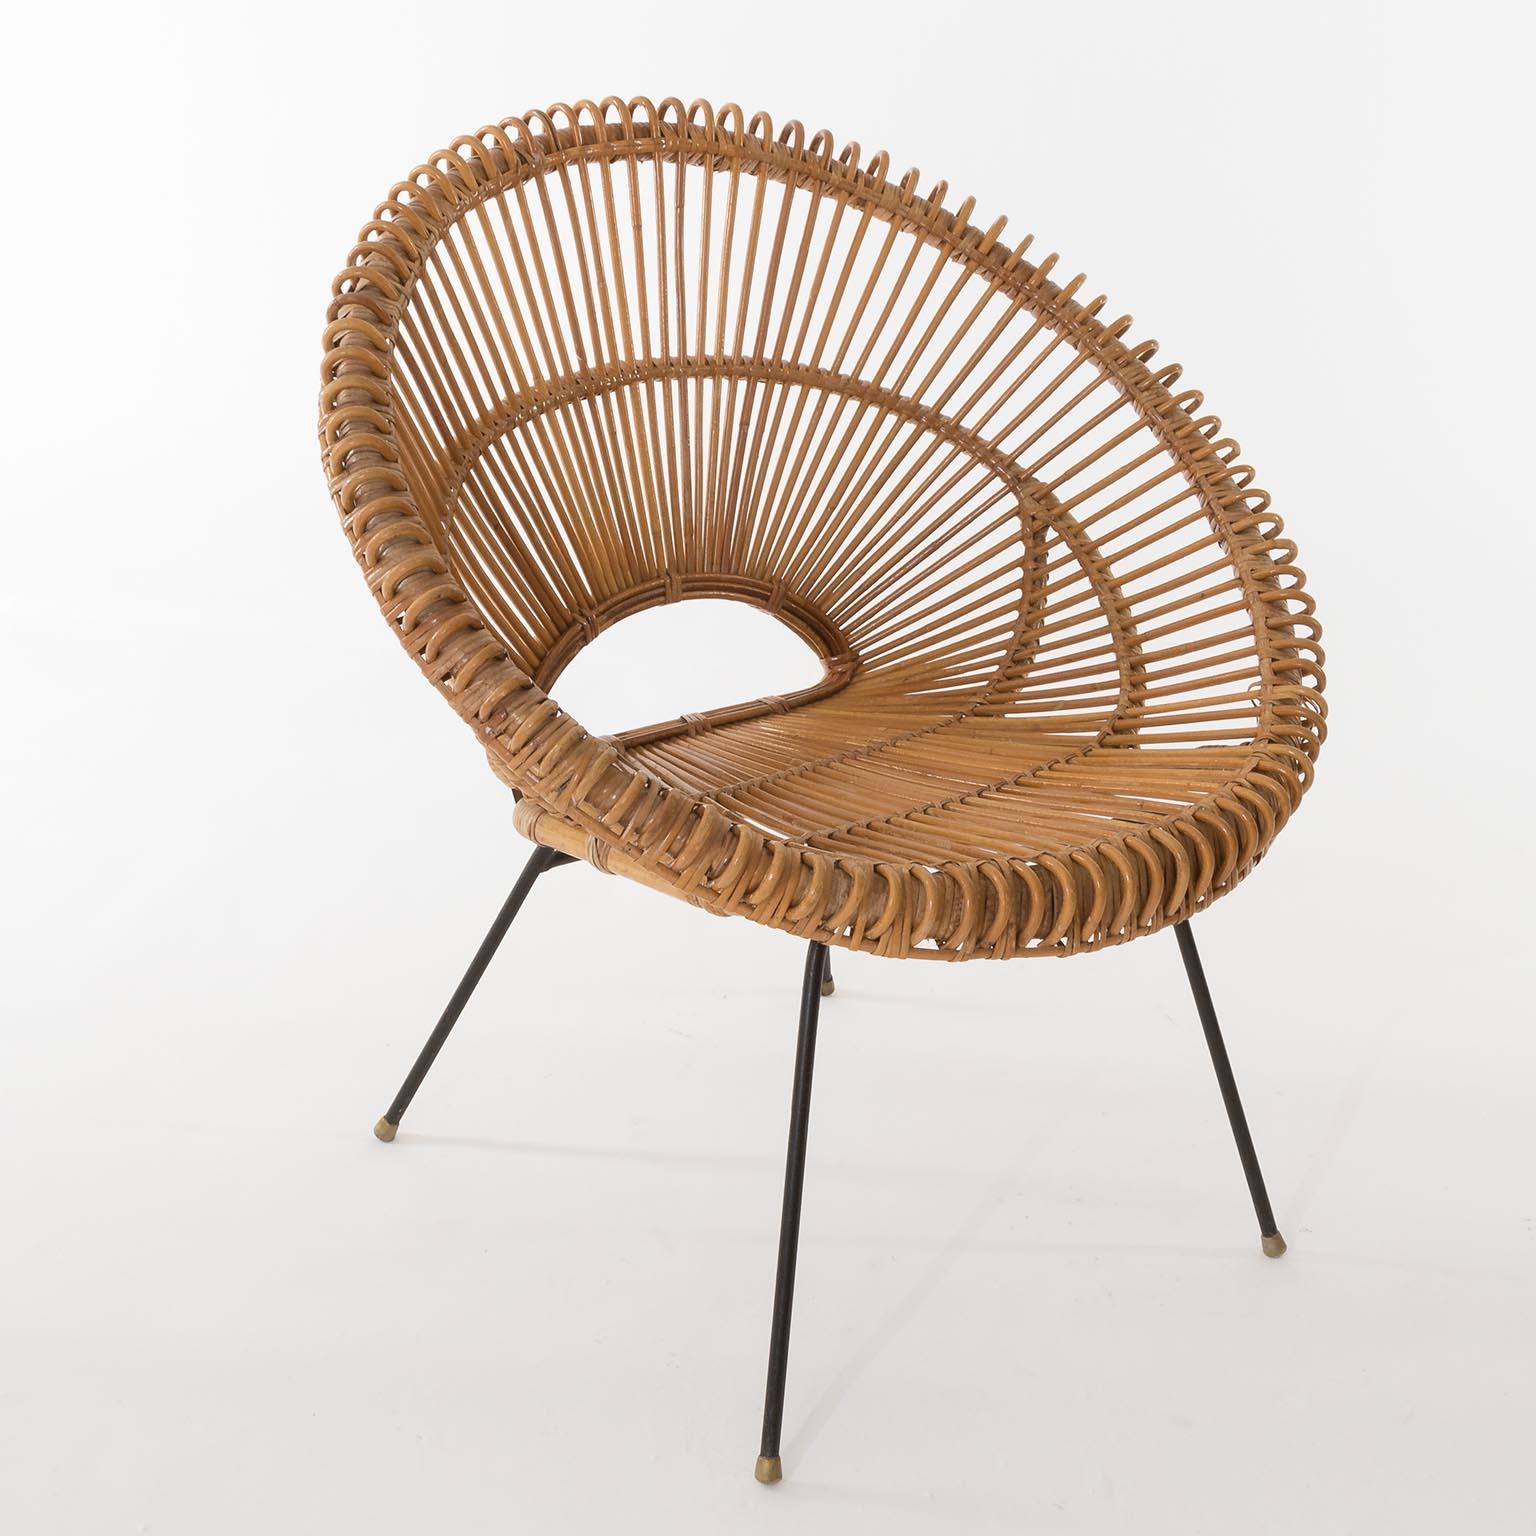 Set Four Mid-Century Modern Rattan Bamboo Chairs, Janine Abraham, Dirk Rol, 1960 For Sale 3